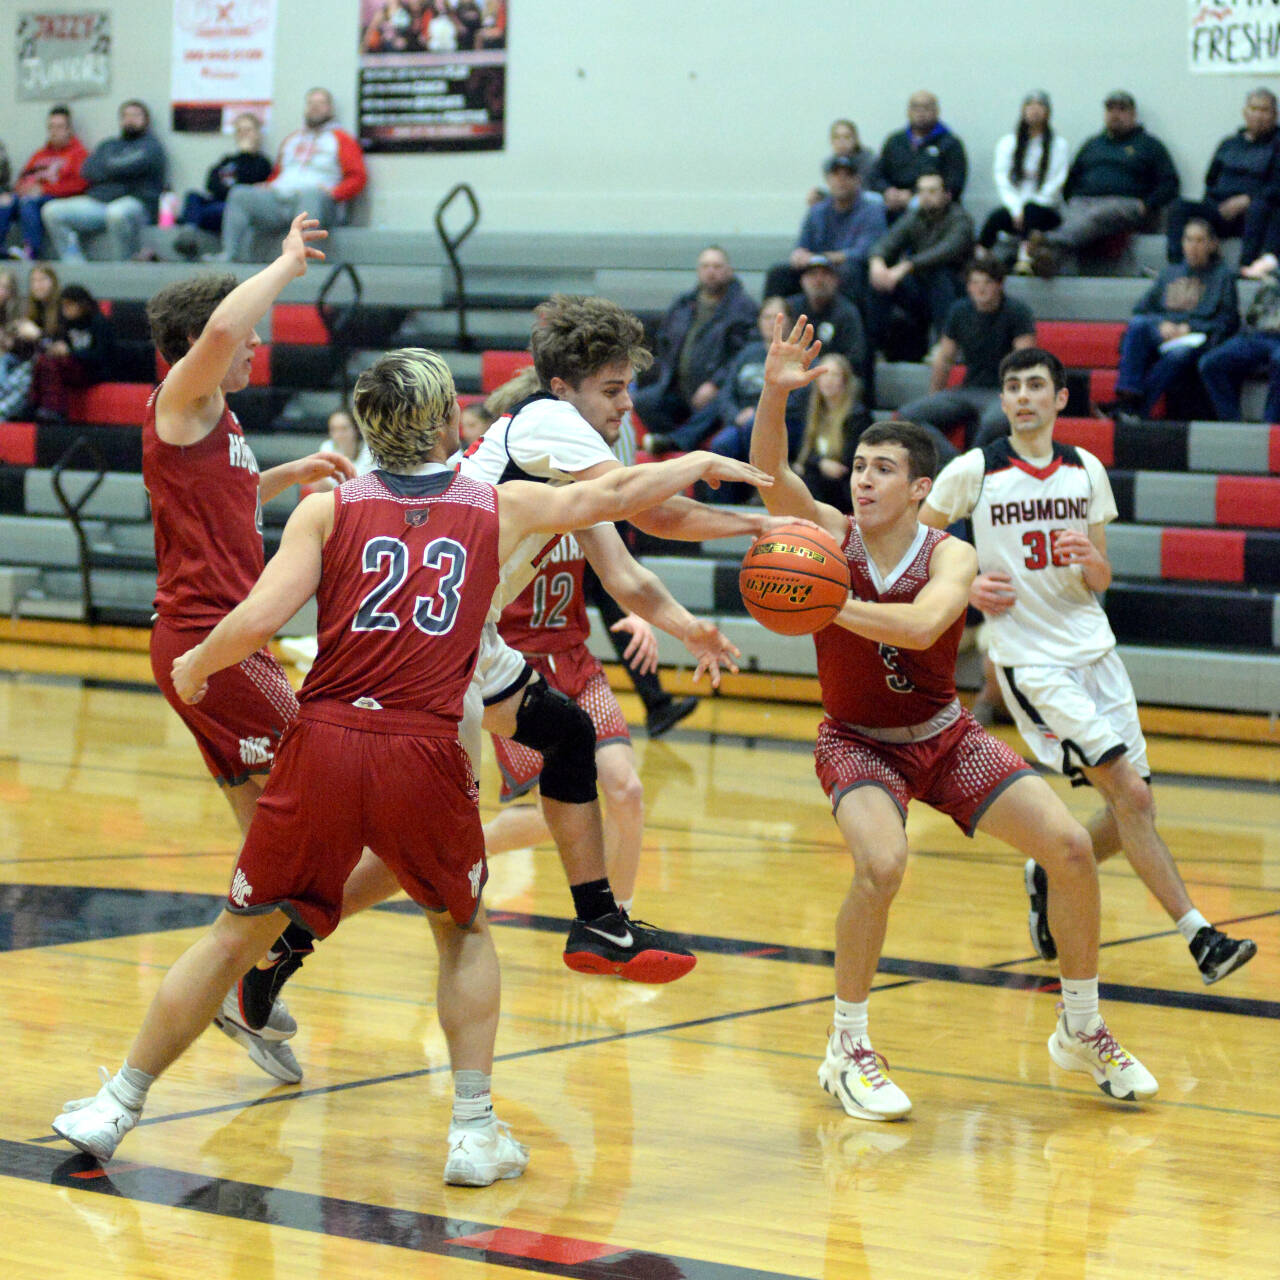 RYAN SPARKS | THE DAILY WORLD Hoquiam’s Justice Stankavich (23) and Owen McNeill (5) surround Raymond’s Skyler Hutson during the Grizzlies’ 80-47 win in the Raymond Holiday Classic on Tuesday at Raymond High School.